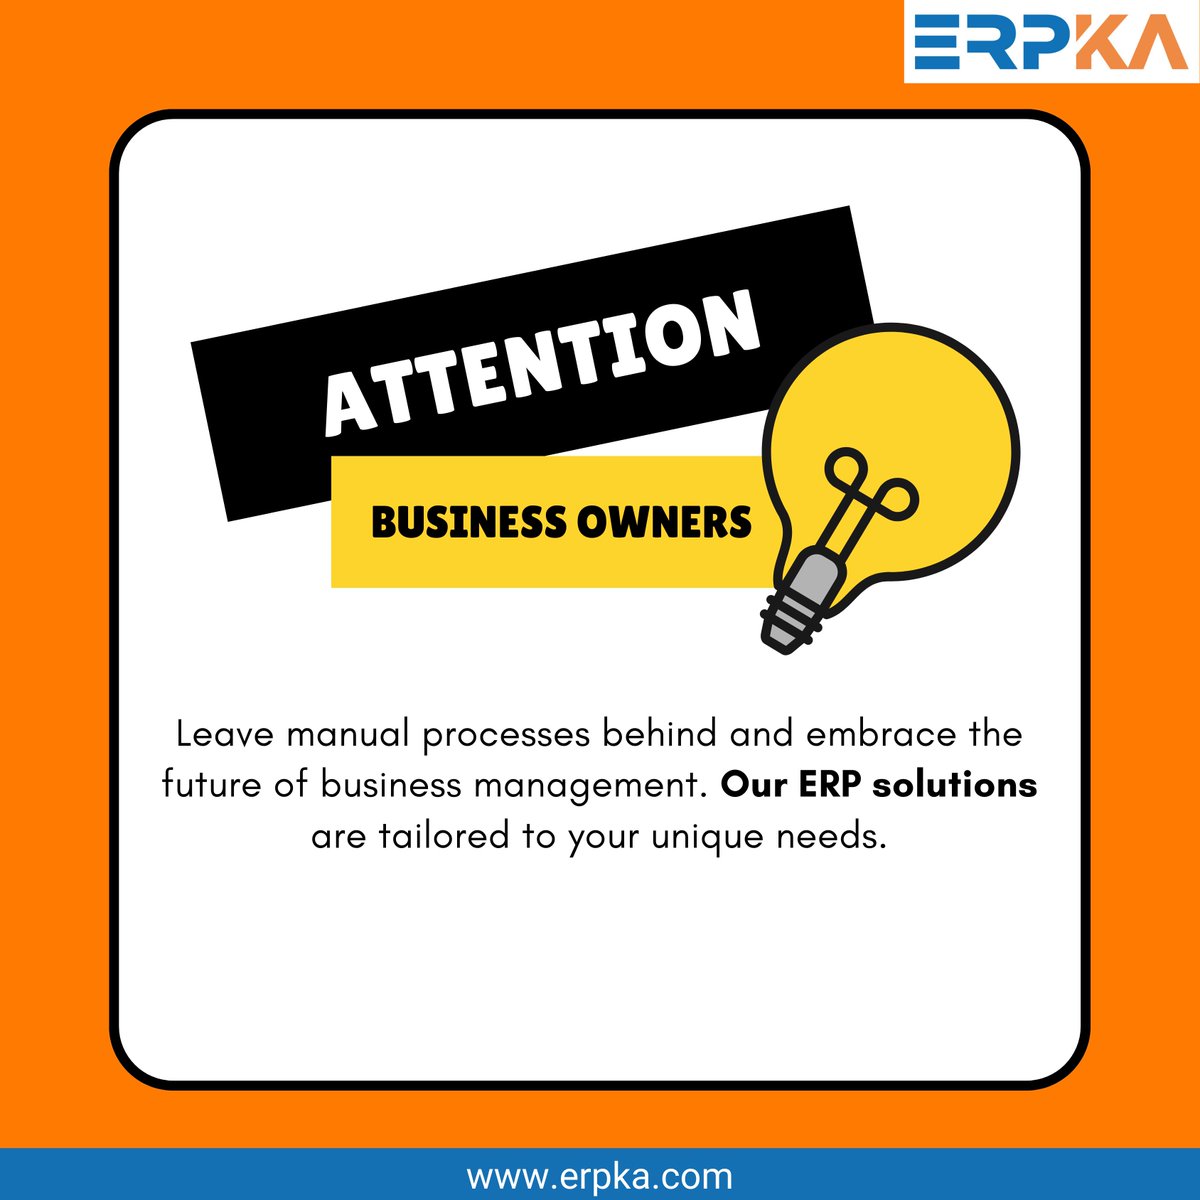 Grow your business by using ERP Software to automate your business work. To know more visit our website 👉 erpka.com #businessmanagementsoftware #erpsoftwaresolutions #erpsoftwarecompany #erpsoftwaredevelopment #erpsystem #erpsoftware #businessautomation